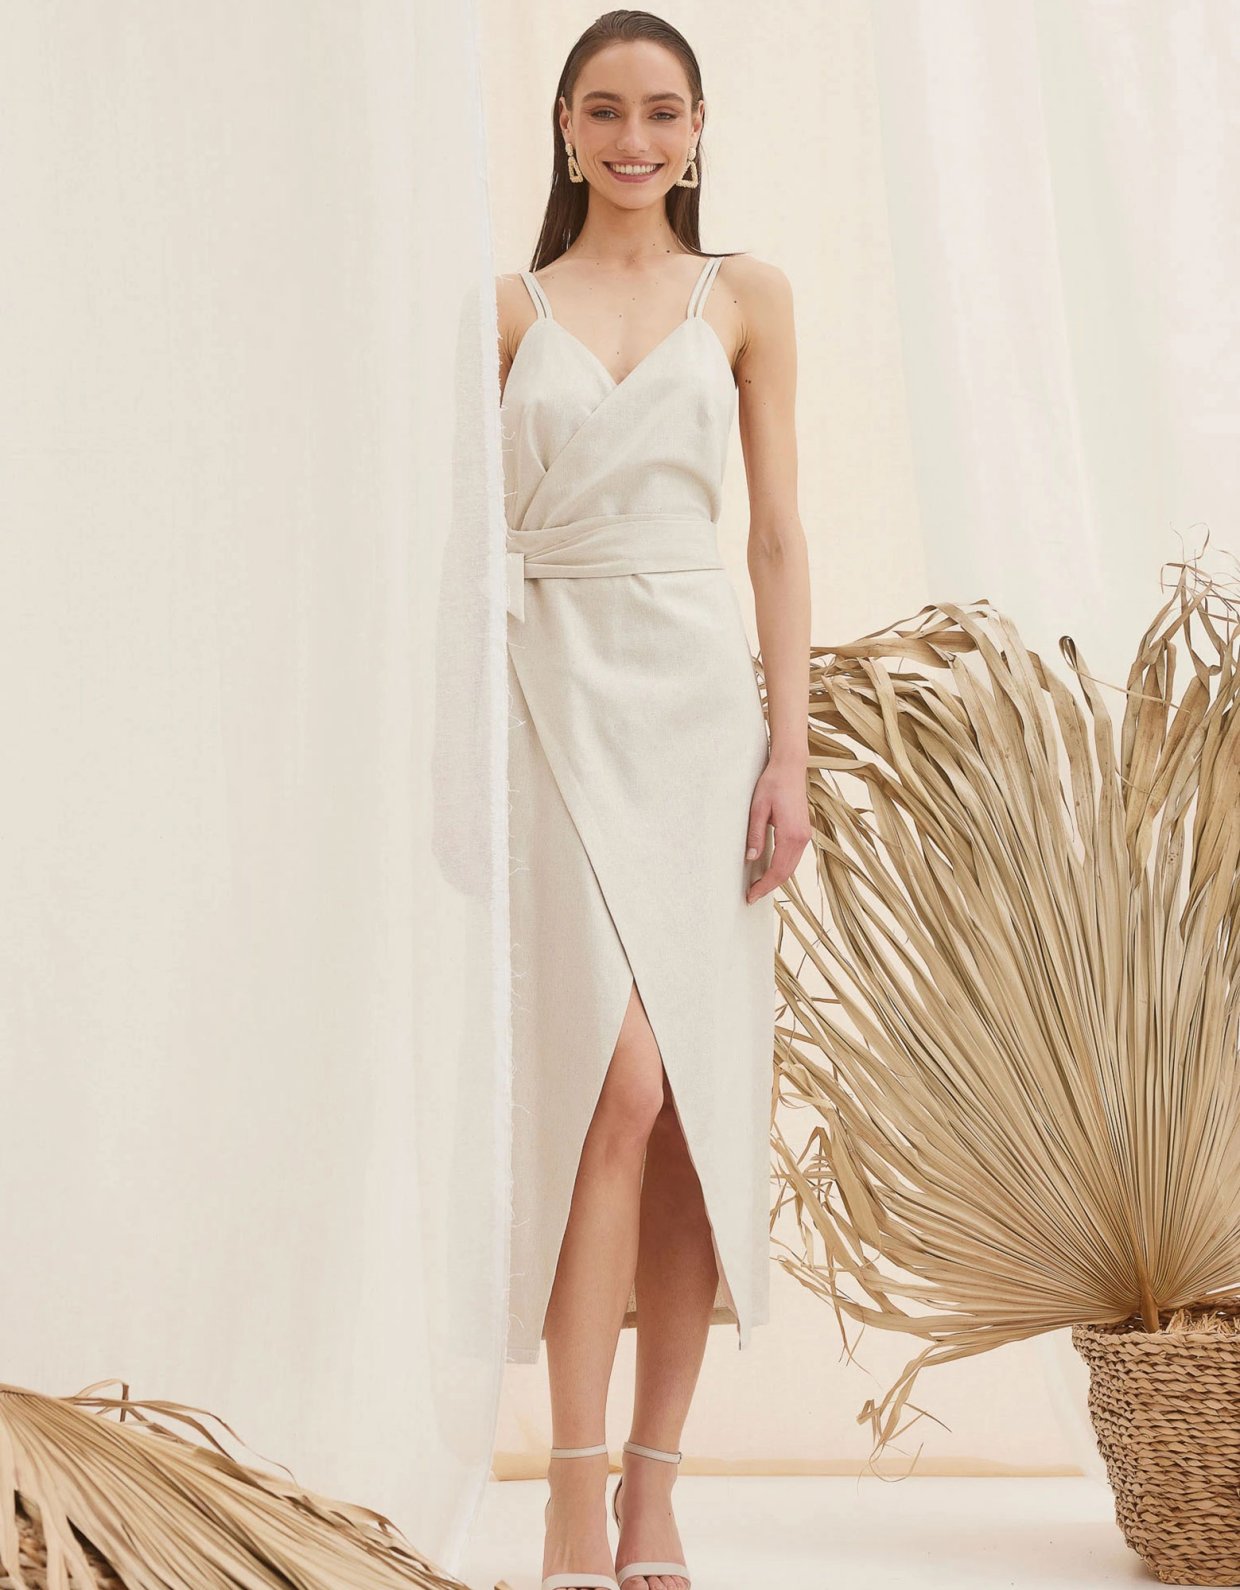 The Knl's Andromeda linen wrap dress